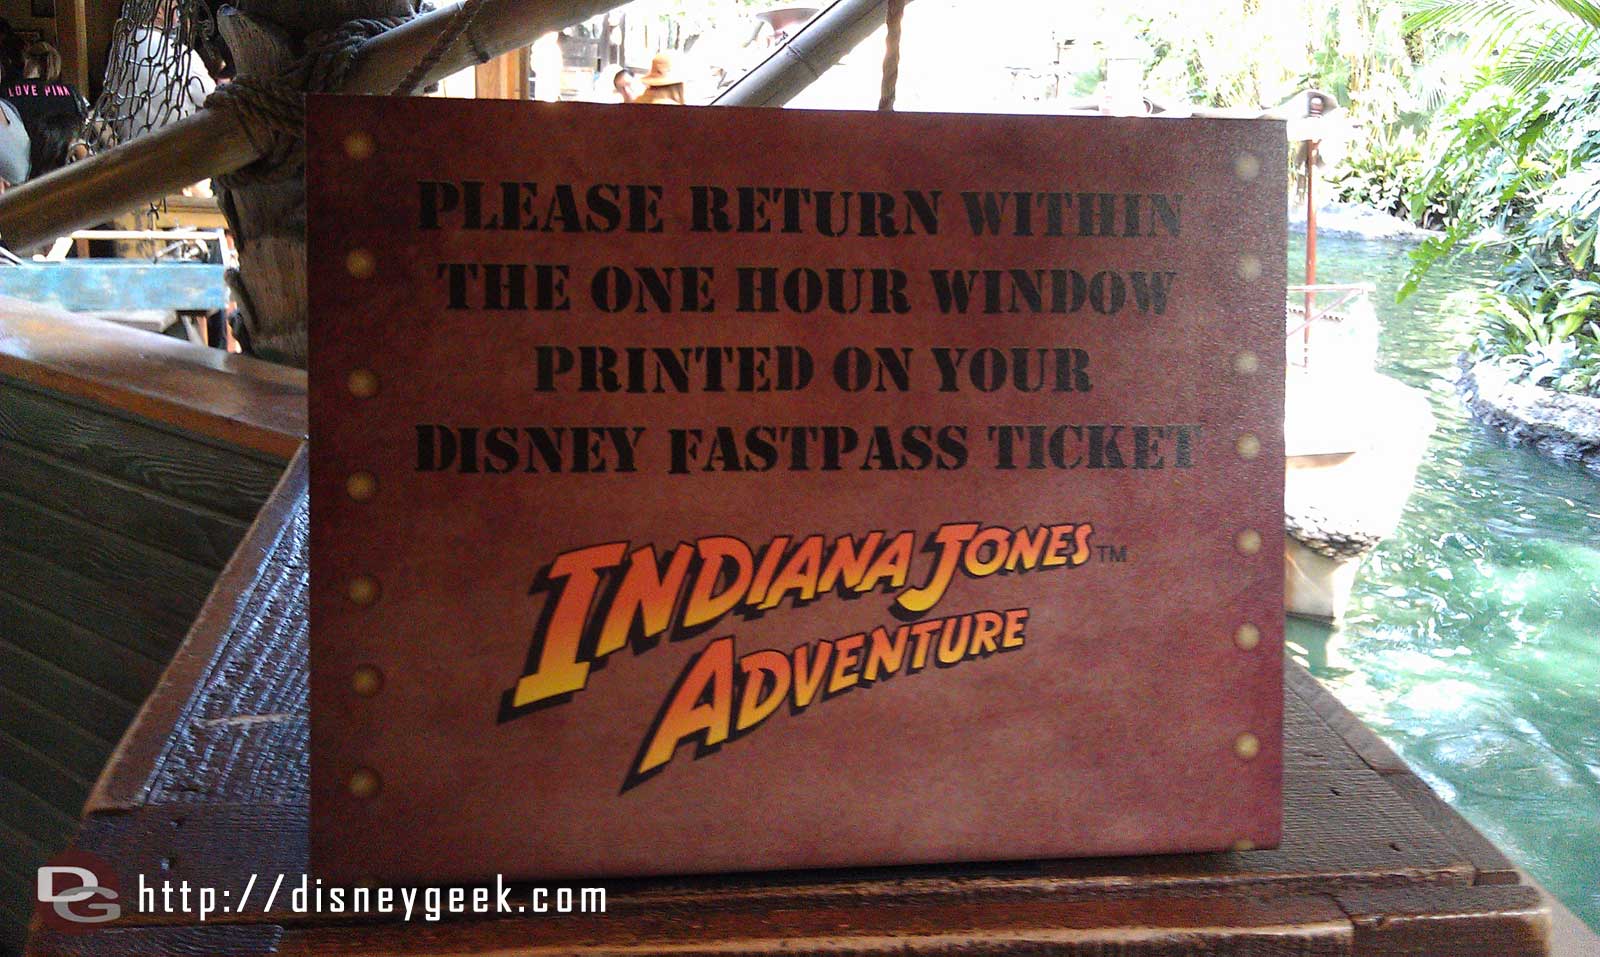 FastPass machines now have signs reminding guests of the return time policy which is going to be enforced now